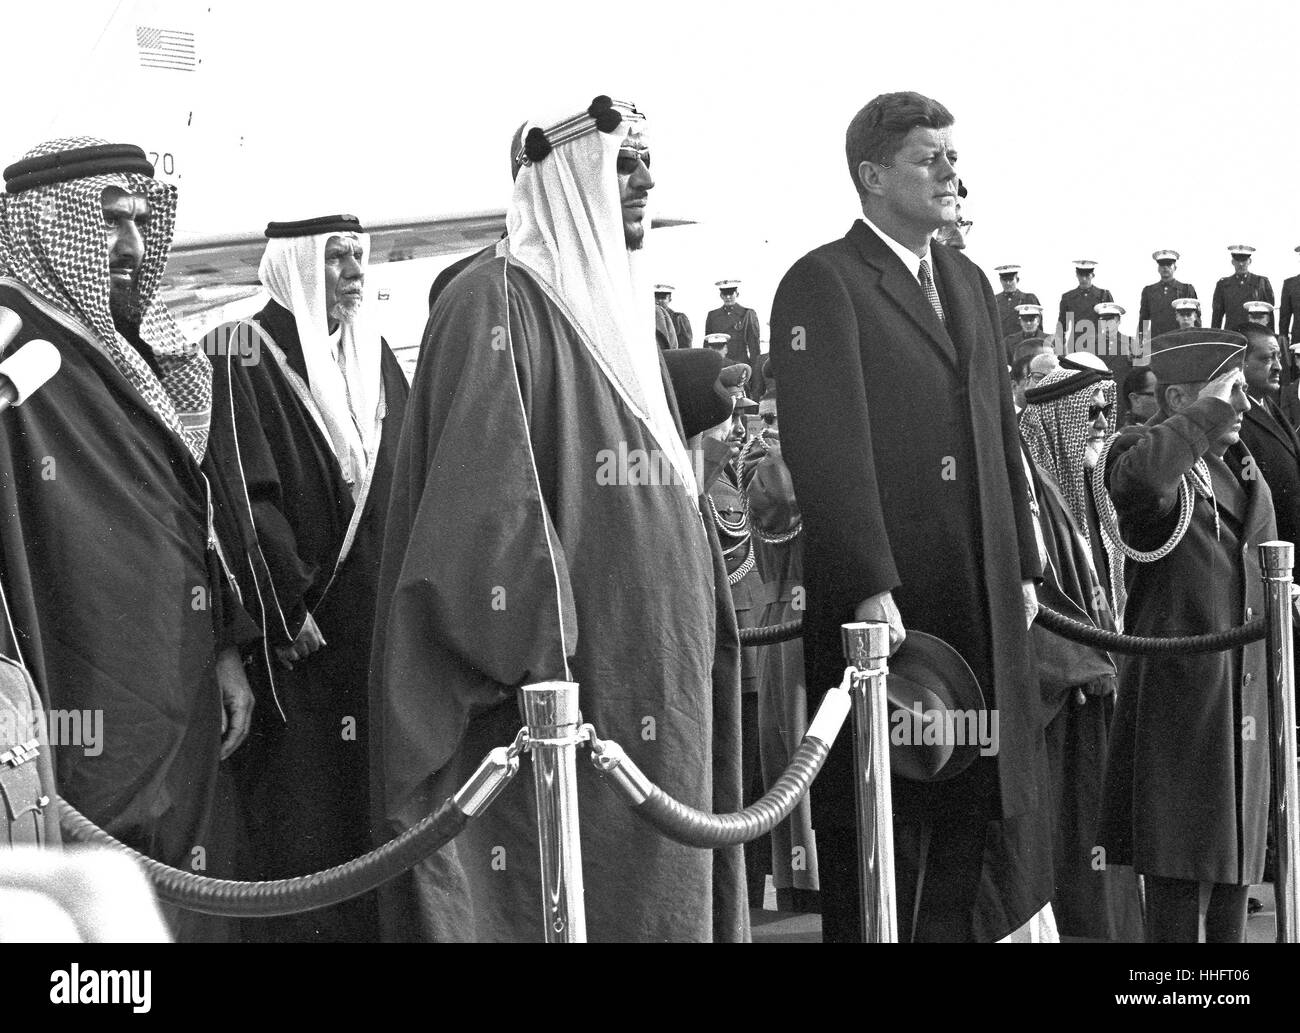 King Saud bin Abdulaziz Al Saud of Saudi Arabia makes remarks as he is welcomed to the United States by US President John F. Kennedy during a ceremony at Andrews Air Force Base, Maryland on February 13, 1962. From left to right: unidentified, President Kennedy, King Saud, US Secretary of State Dean Rusk, unidentified, and unidentified. Credit: Arnie Sachs / CNP - NO WIRE SERVICE - Photo: Arnie Sachs/Consolidated/dpa Stock Photo